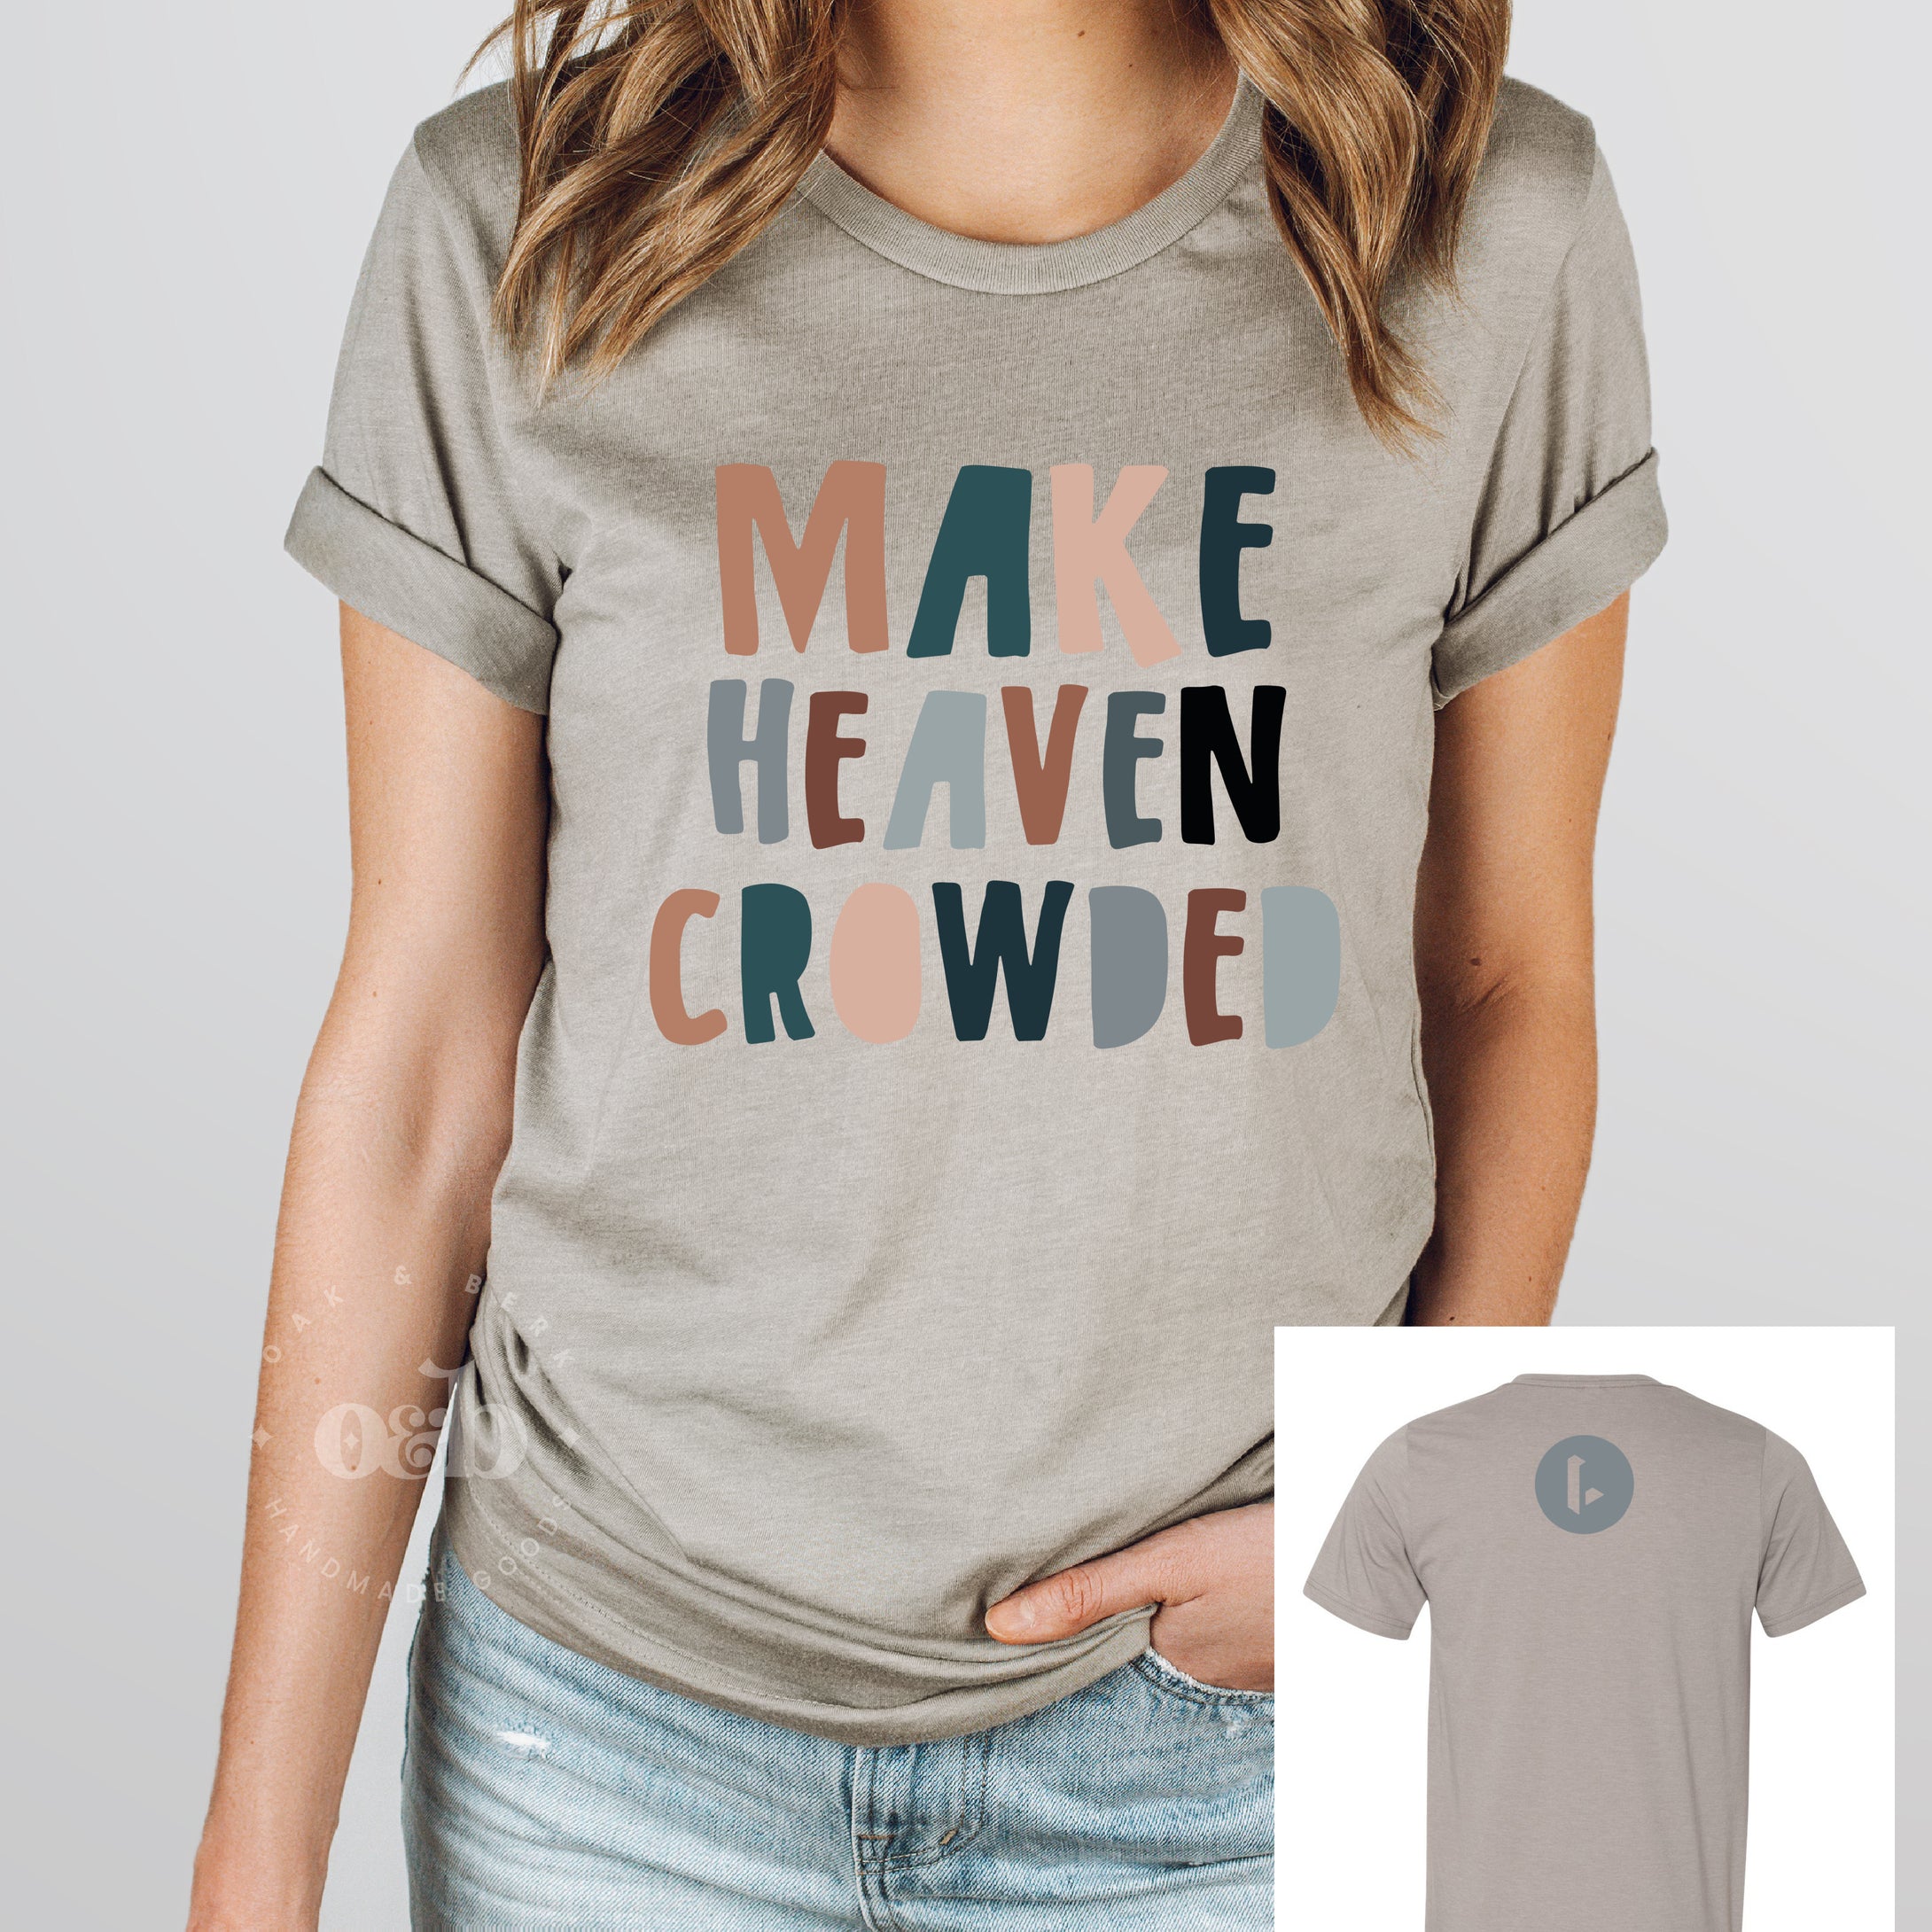 Limitless | Make Heaven Crowded, adult